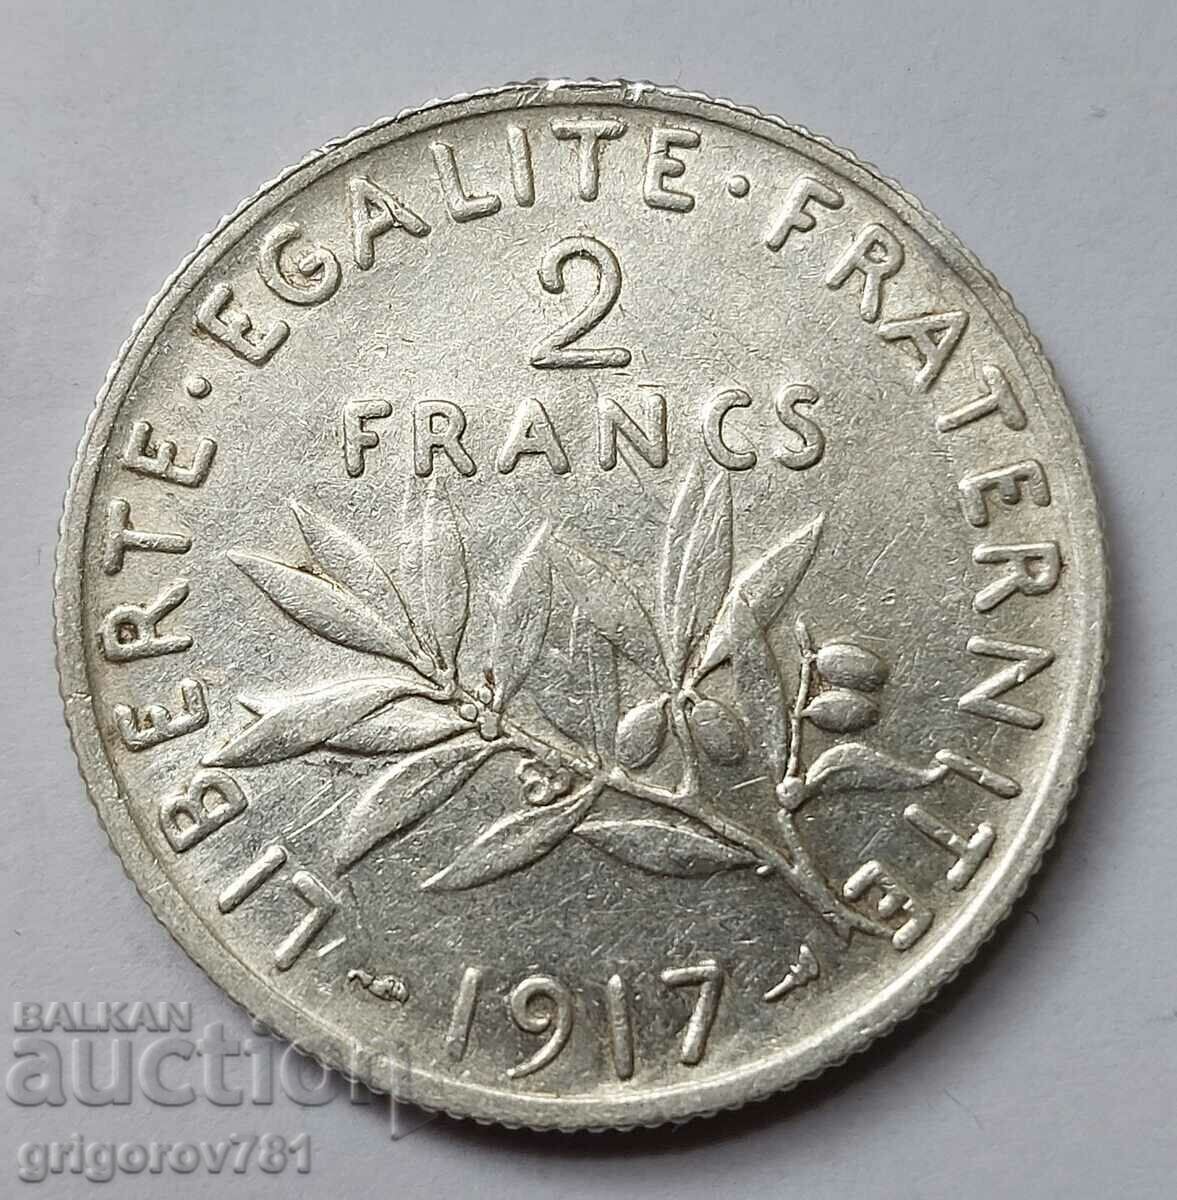 2 Francs Silver France 1917 - Silver Coin #104